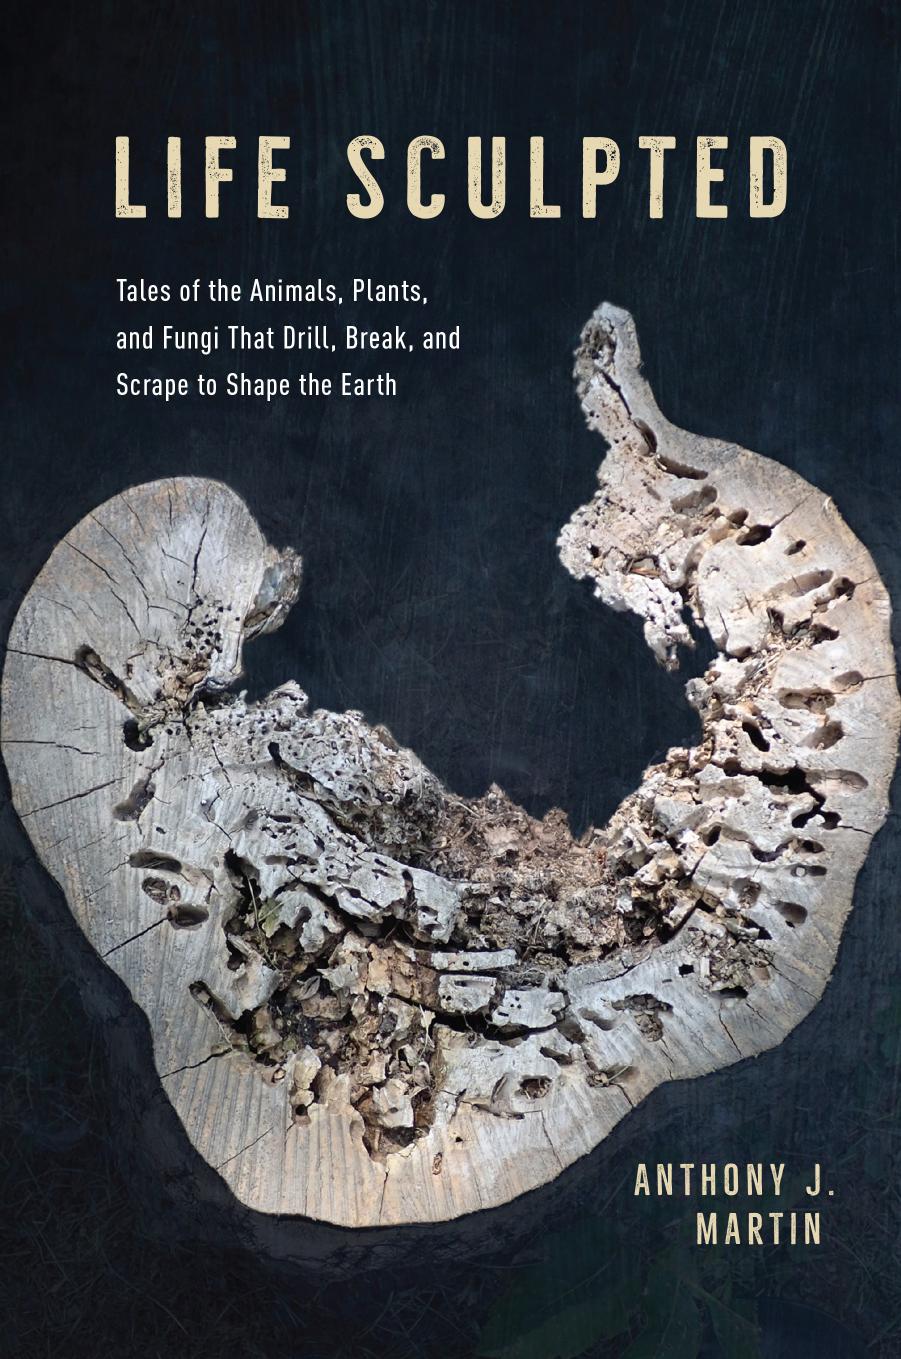 Life Sculpted: Tales of the Animals, Plants, and Fungi That Drill, Break, and Scrape to Shape the Earth by Anthony J. Martin